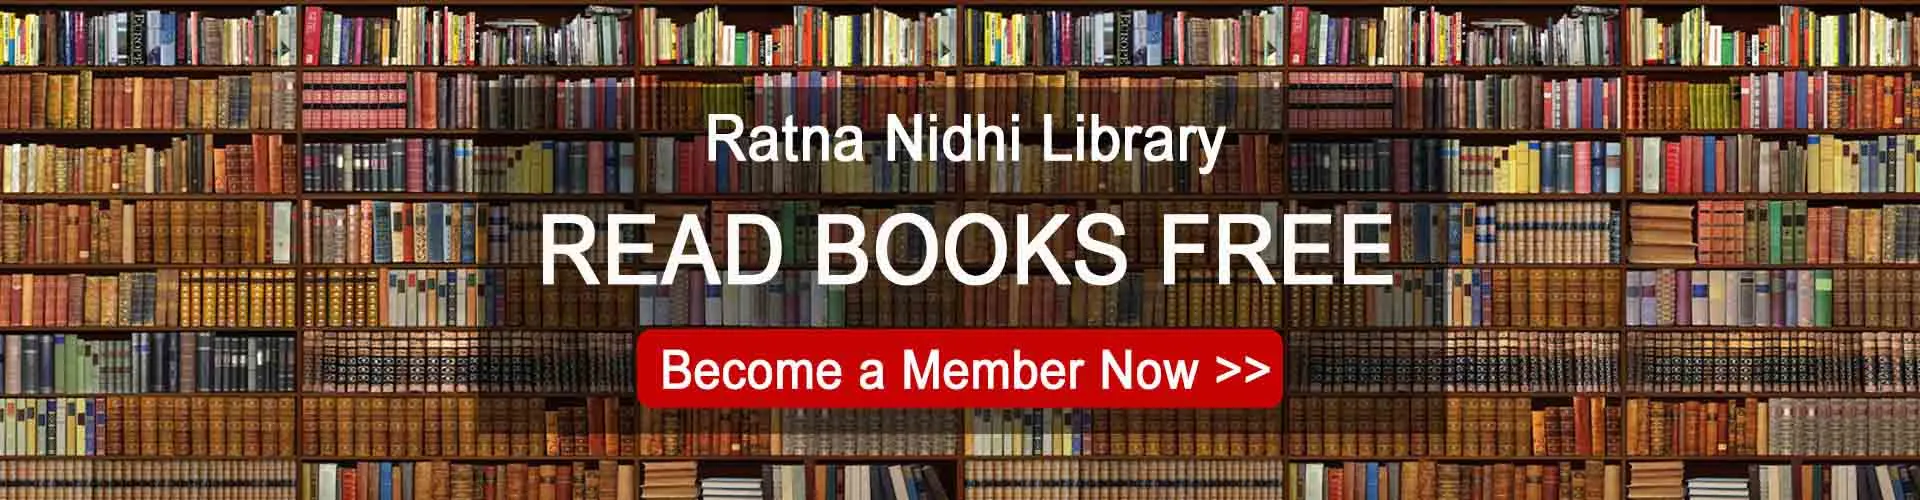 Read Books Free - Become a Member Now